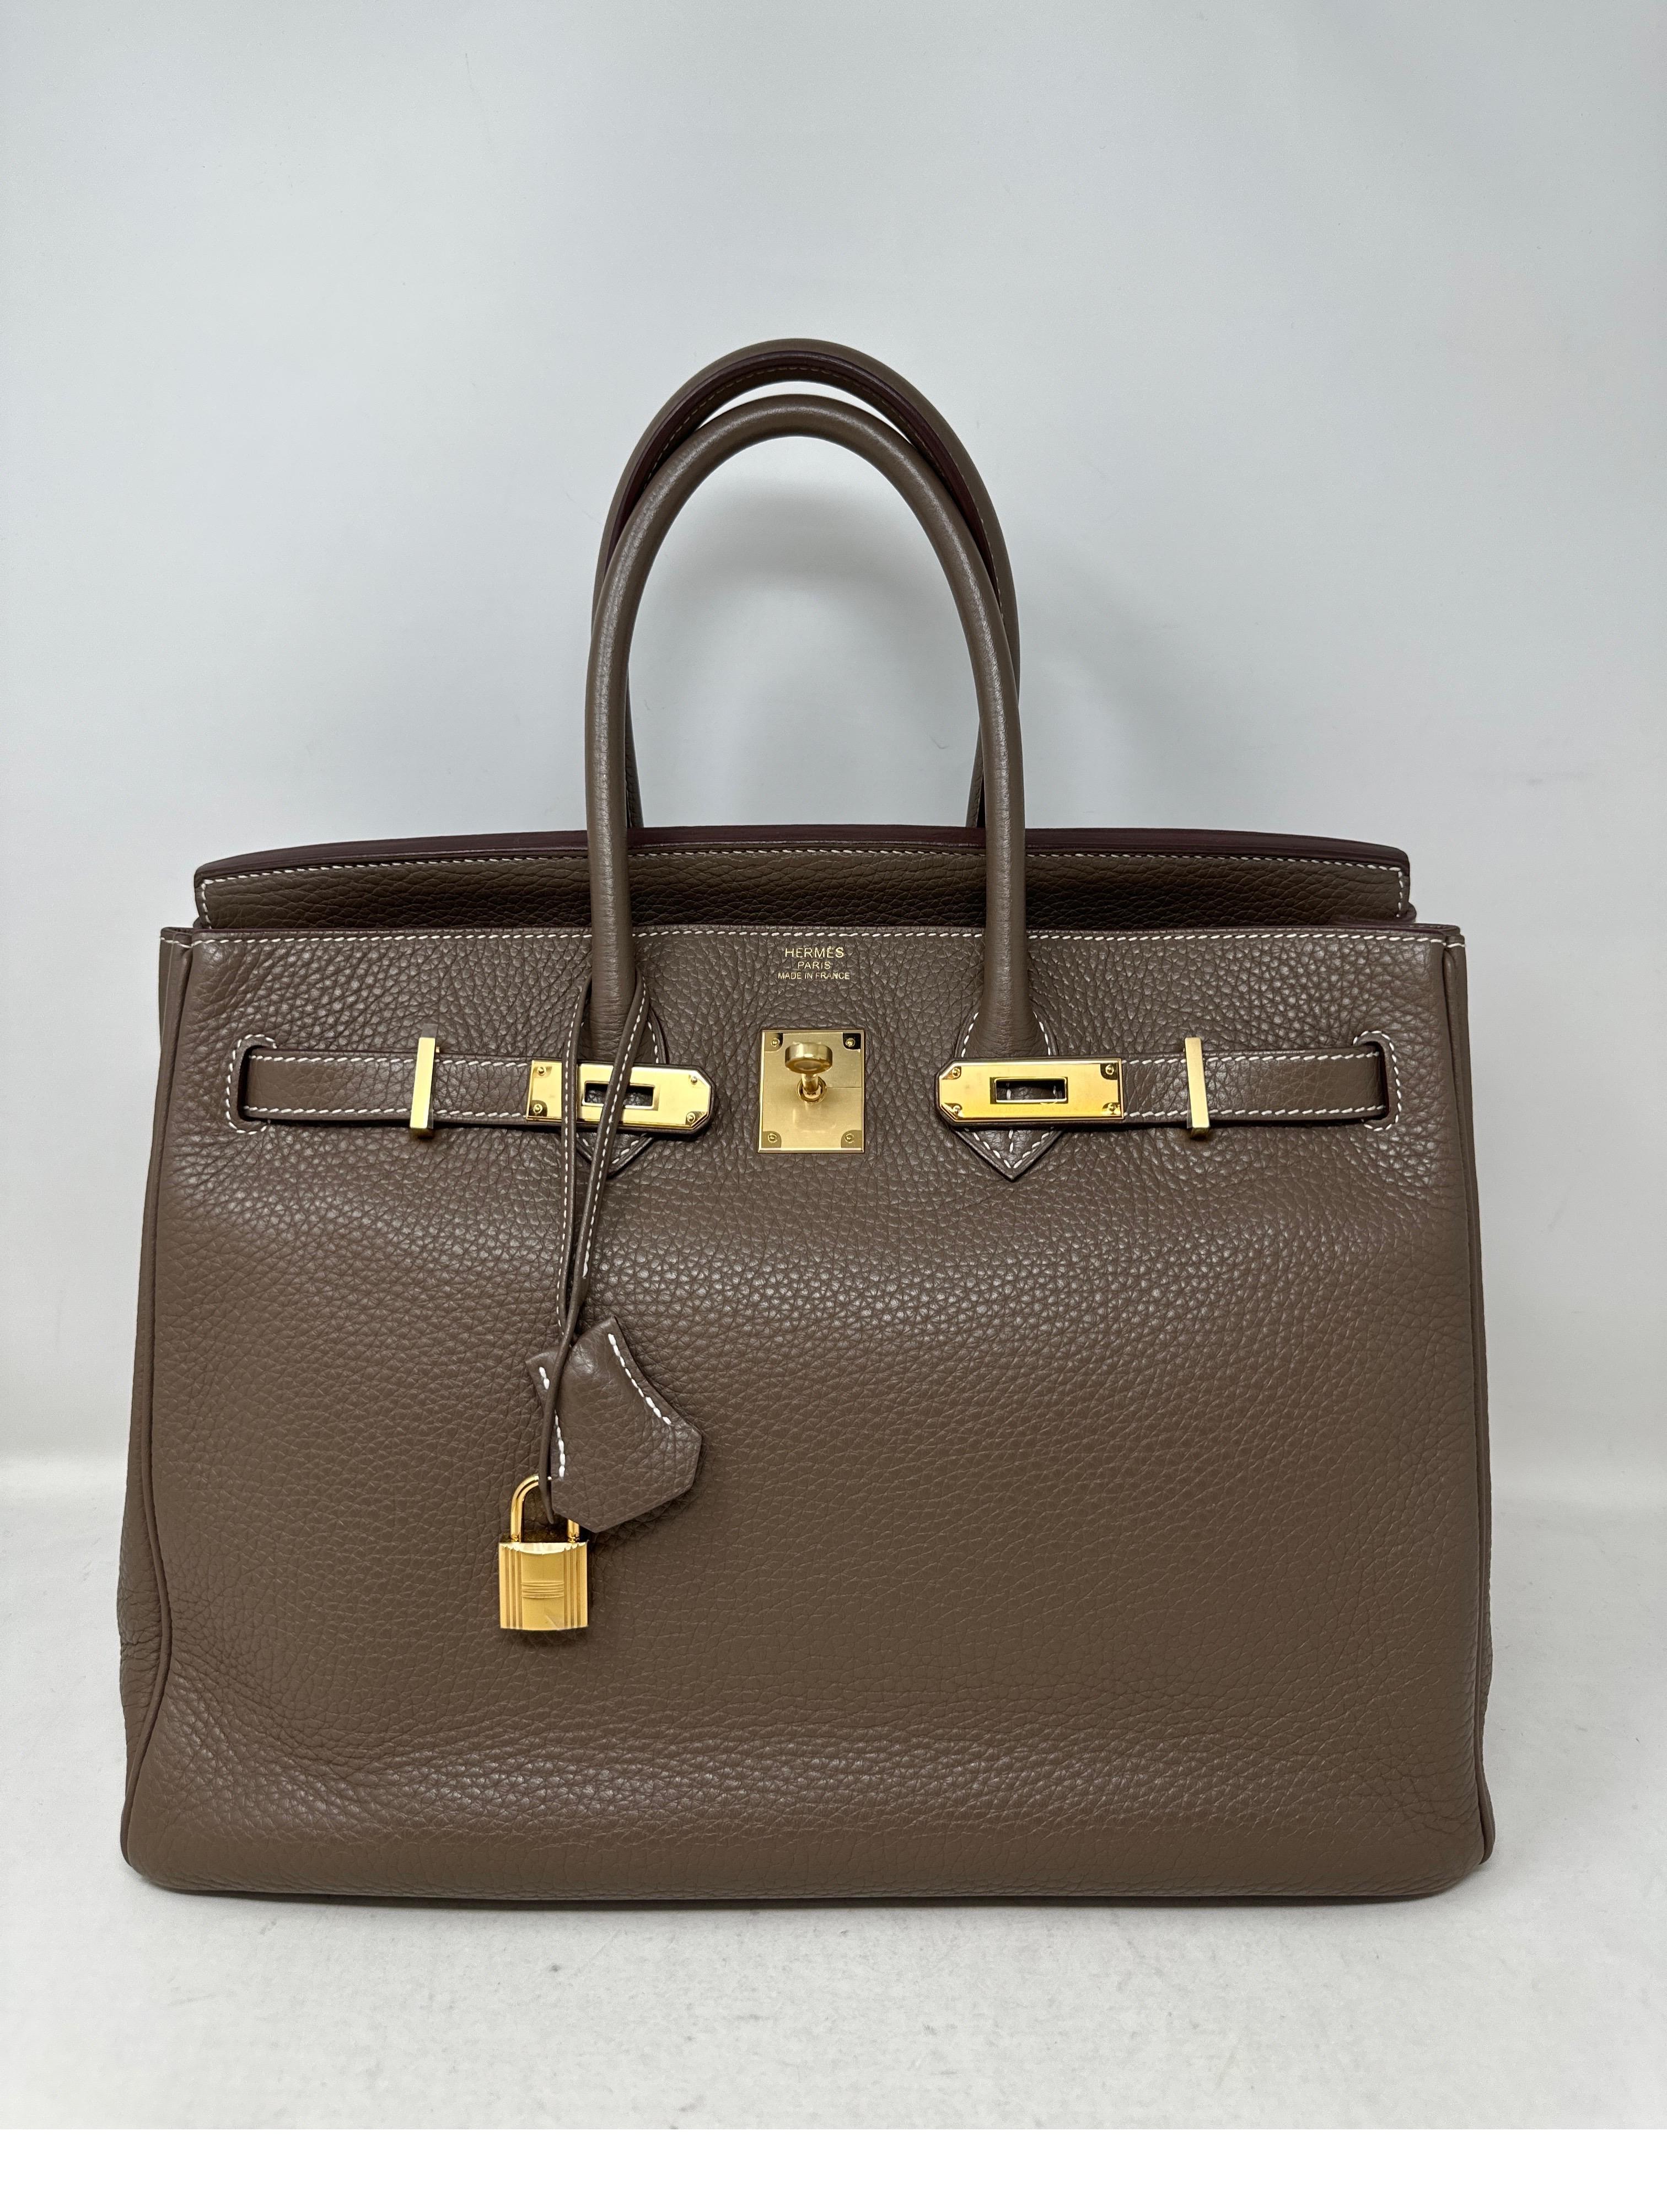 Hermes Etoupe Birkin 35 Bag. Excellent condition. Gorgeous grey tan color. Hard to find combination. Gold hardware too. Clemence leather. Great investment bag. Includes clochette, lock, keys, and dust bag. Guaranteed authentic. 